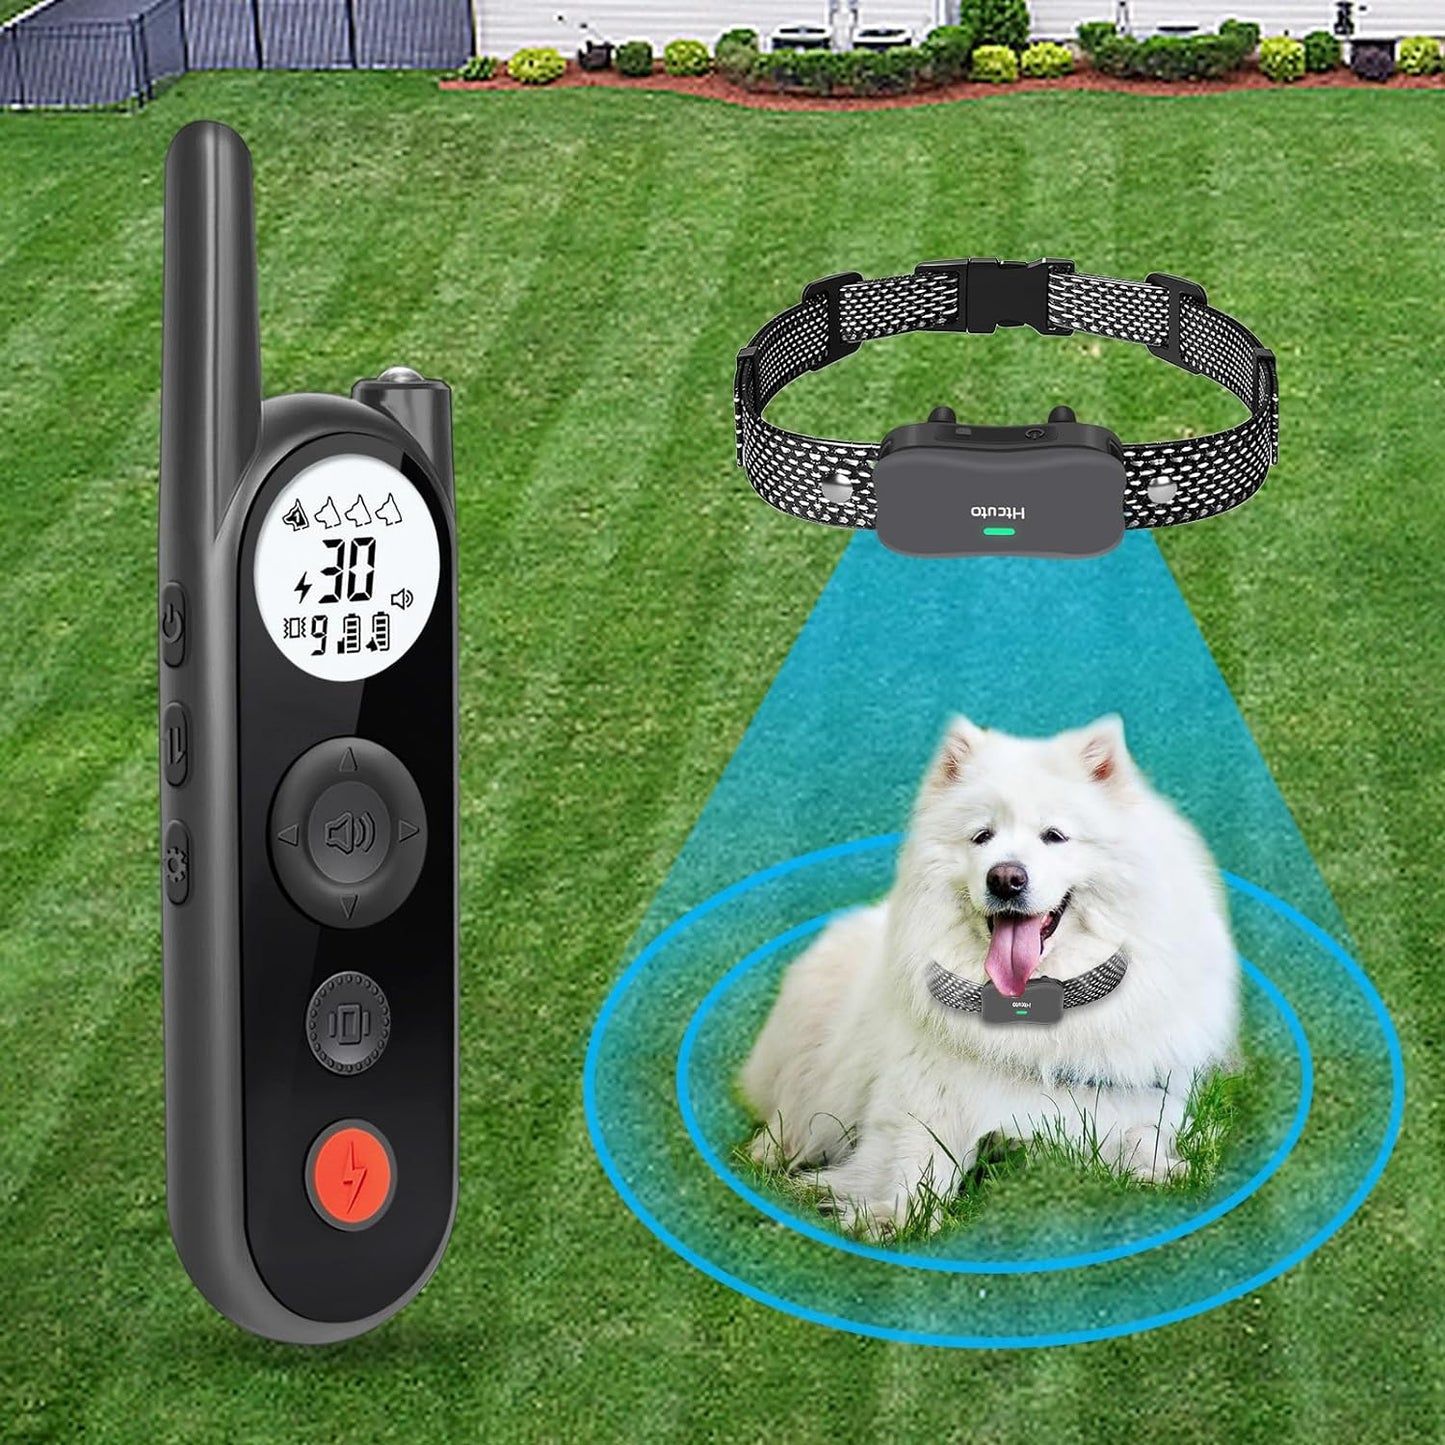 Htcuto Wireless Dog Fence, 6100 FT Electric Dog Fence with Remote, 365 Days Battery Rechargeable Pet Containment System for Dogs with IPX7 Waterproof, Vibration/Bee